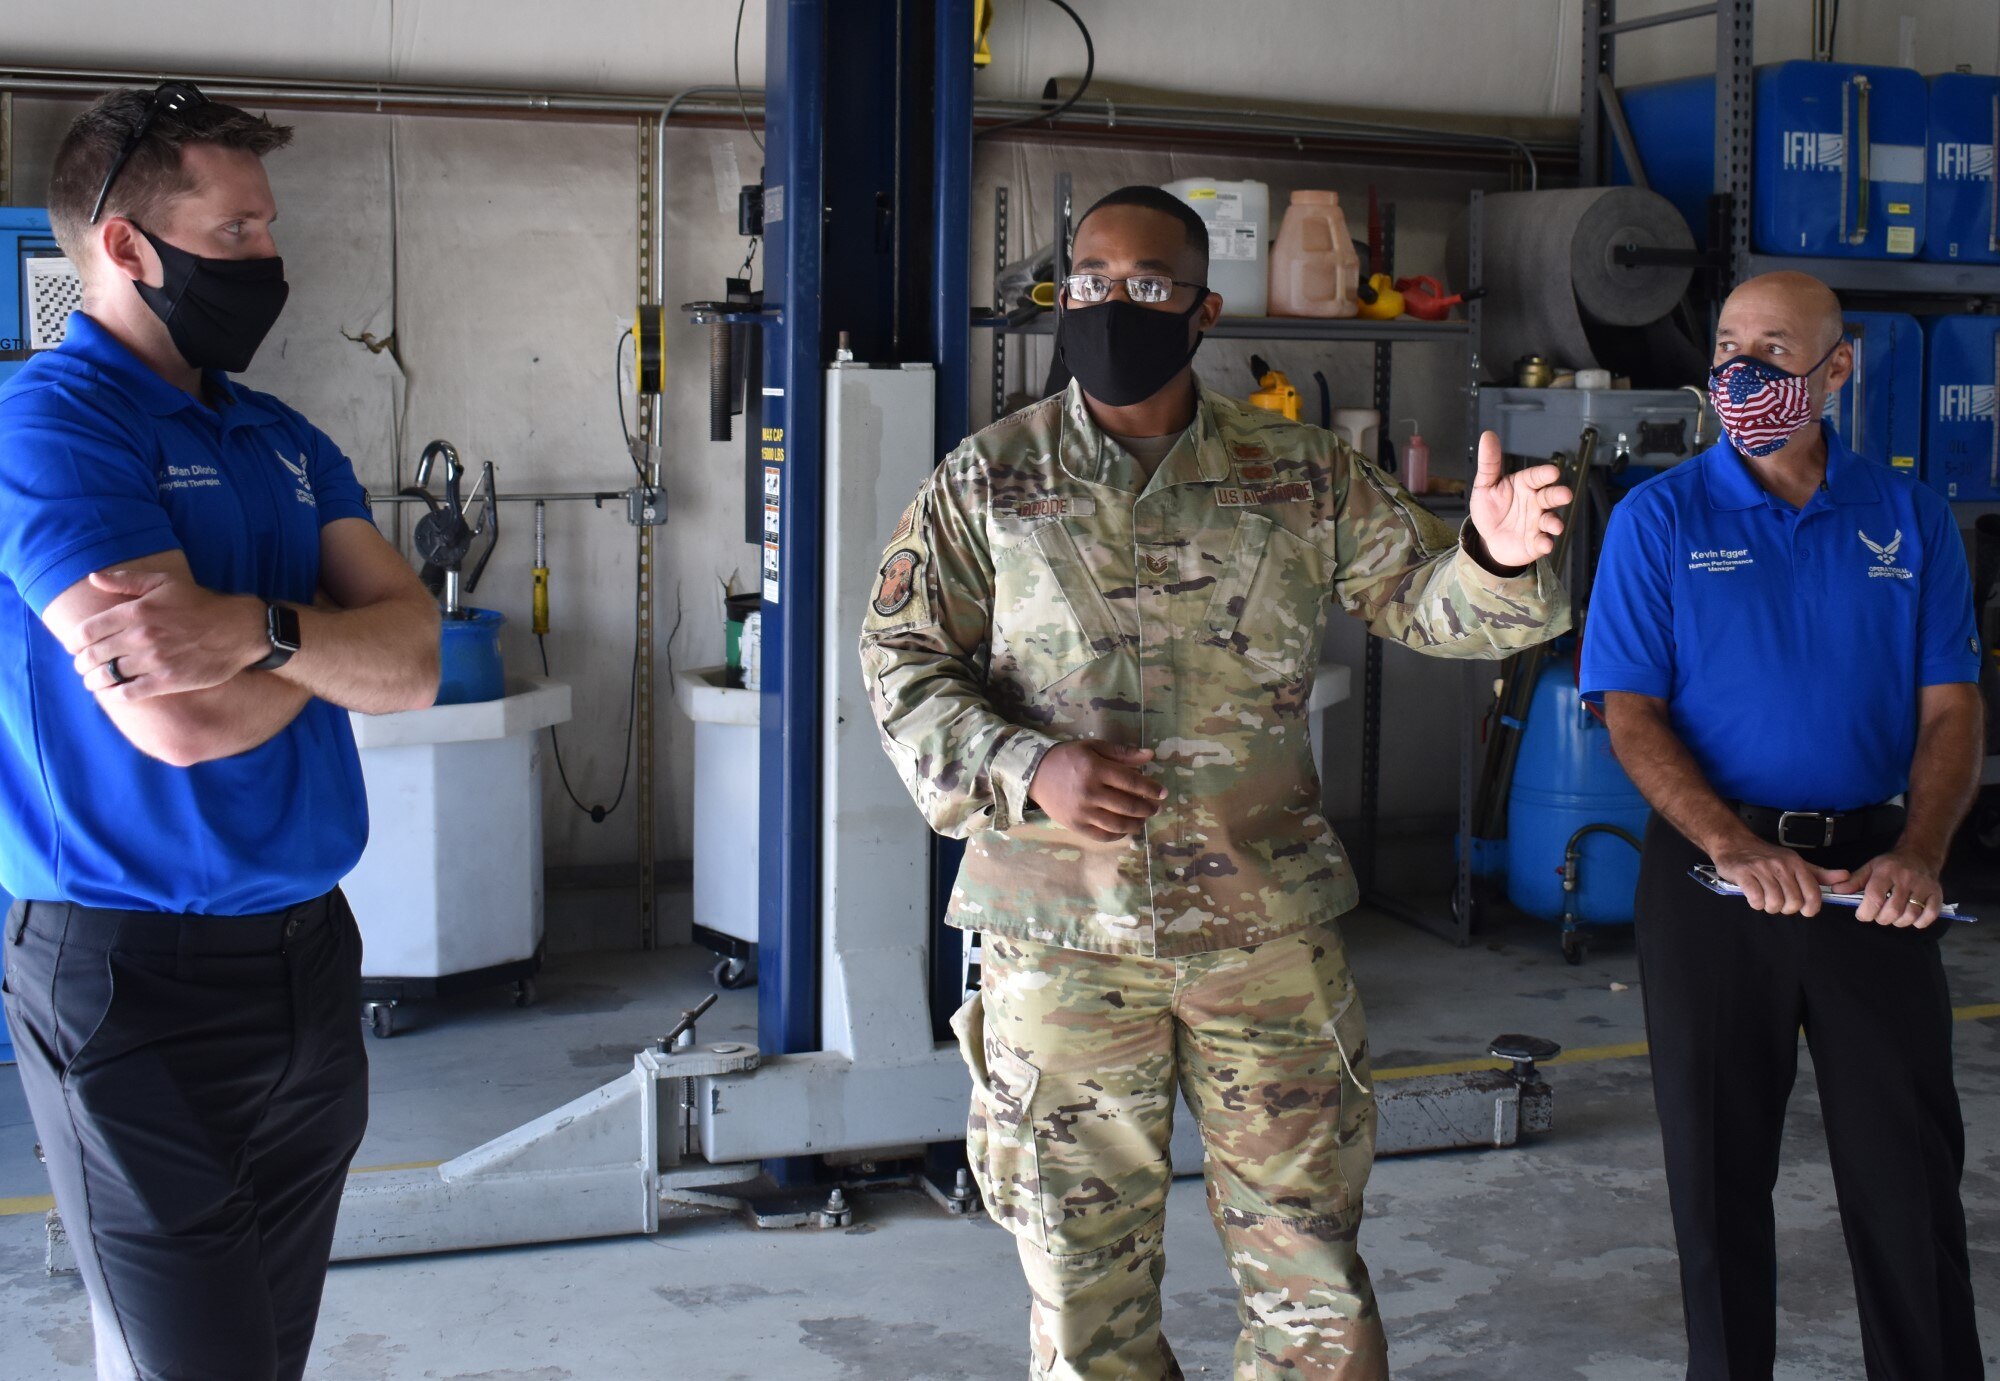 Tech. Sgt. Jamal Goode, 75th Logistics Readiness Squadron, gives a tour of Vehicle Maintenance, to members of the Operational Support Team, Kevin Egger (right) and Brian Diiorio.